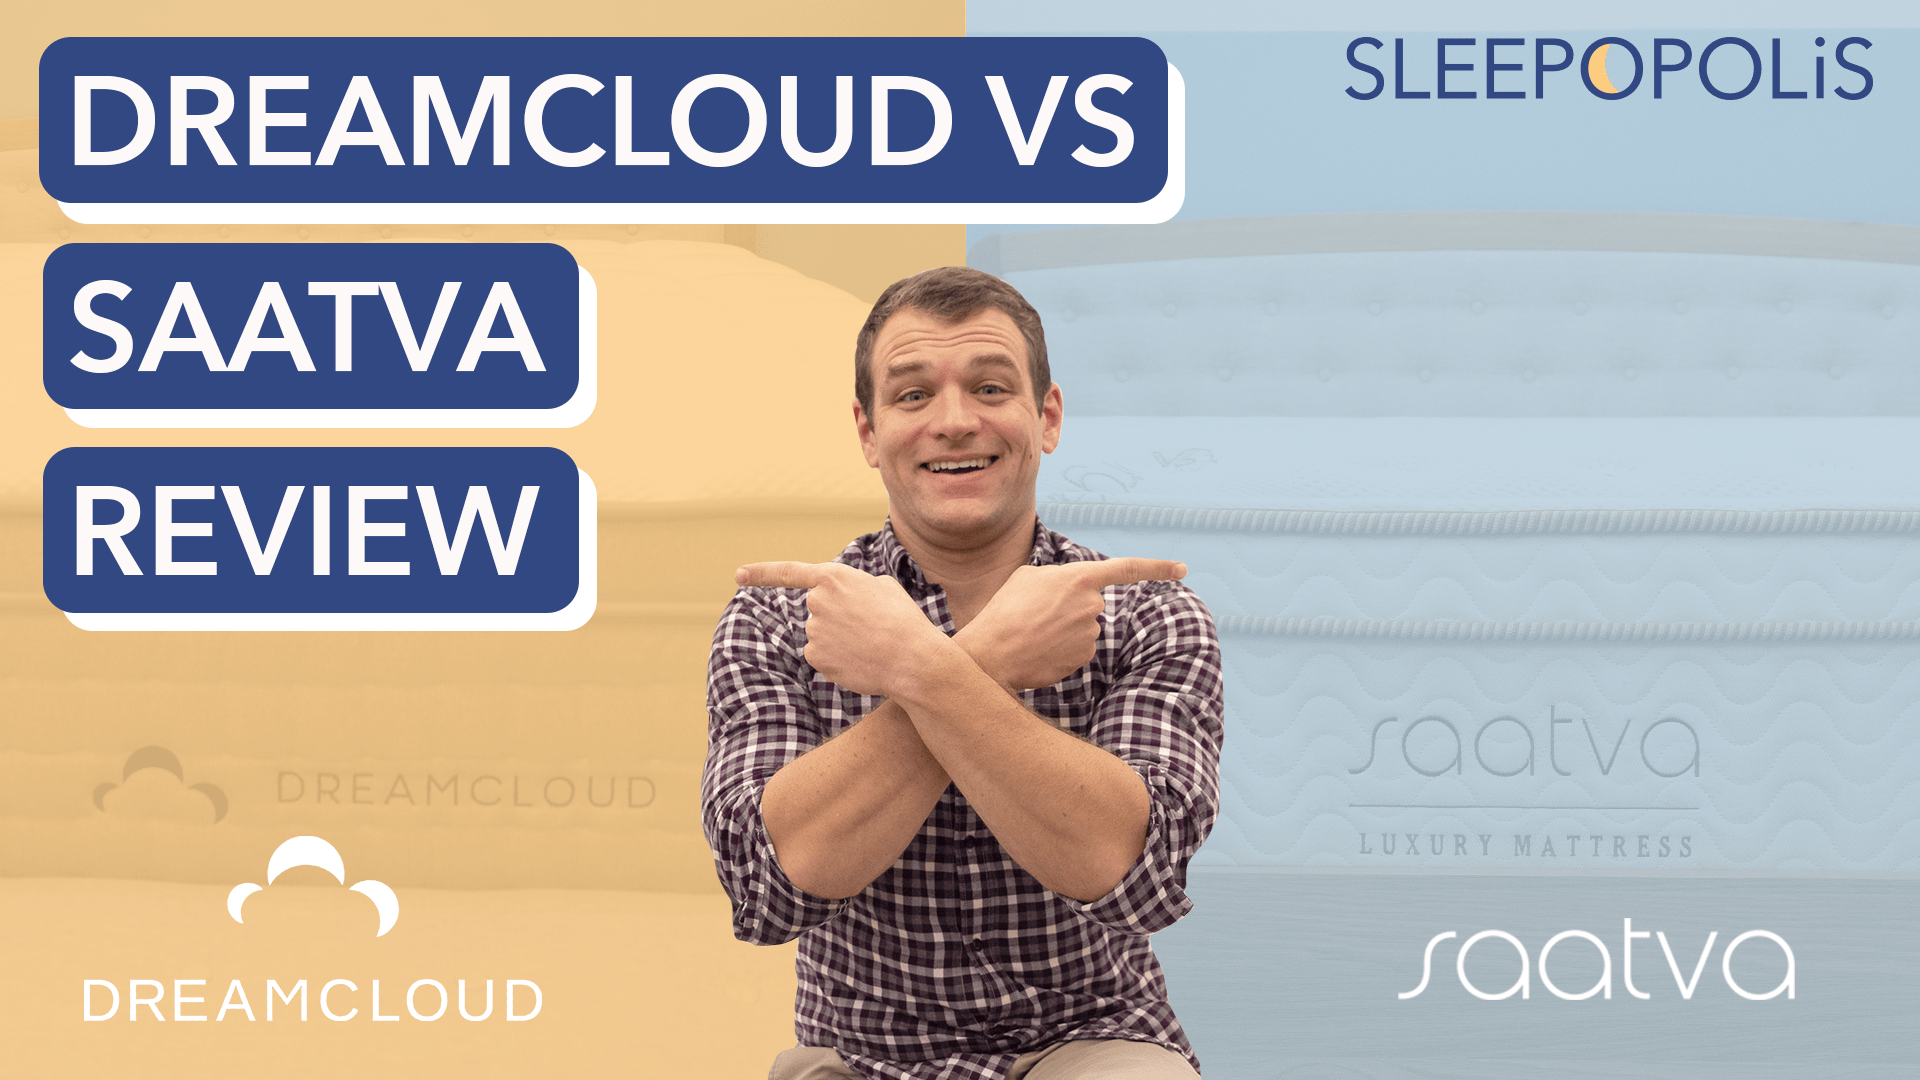 Check out our full Saatva vs DreamCloud Premier mattress review to find out...